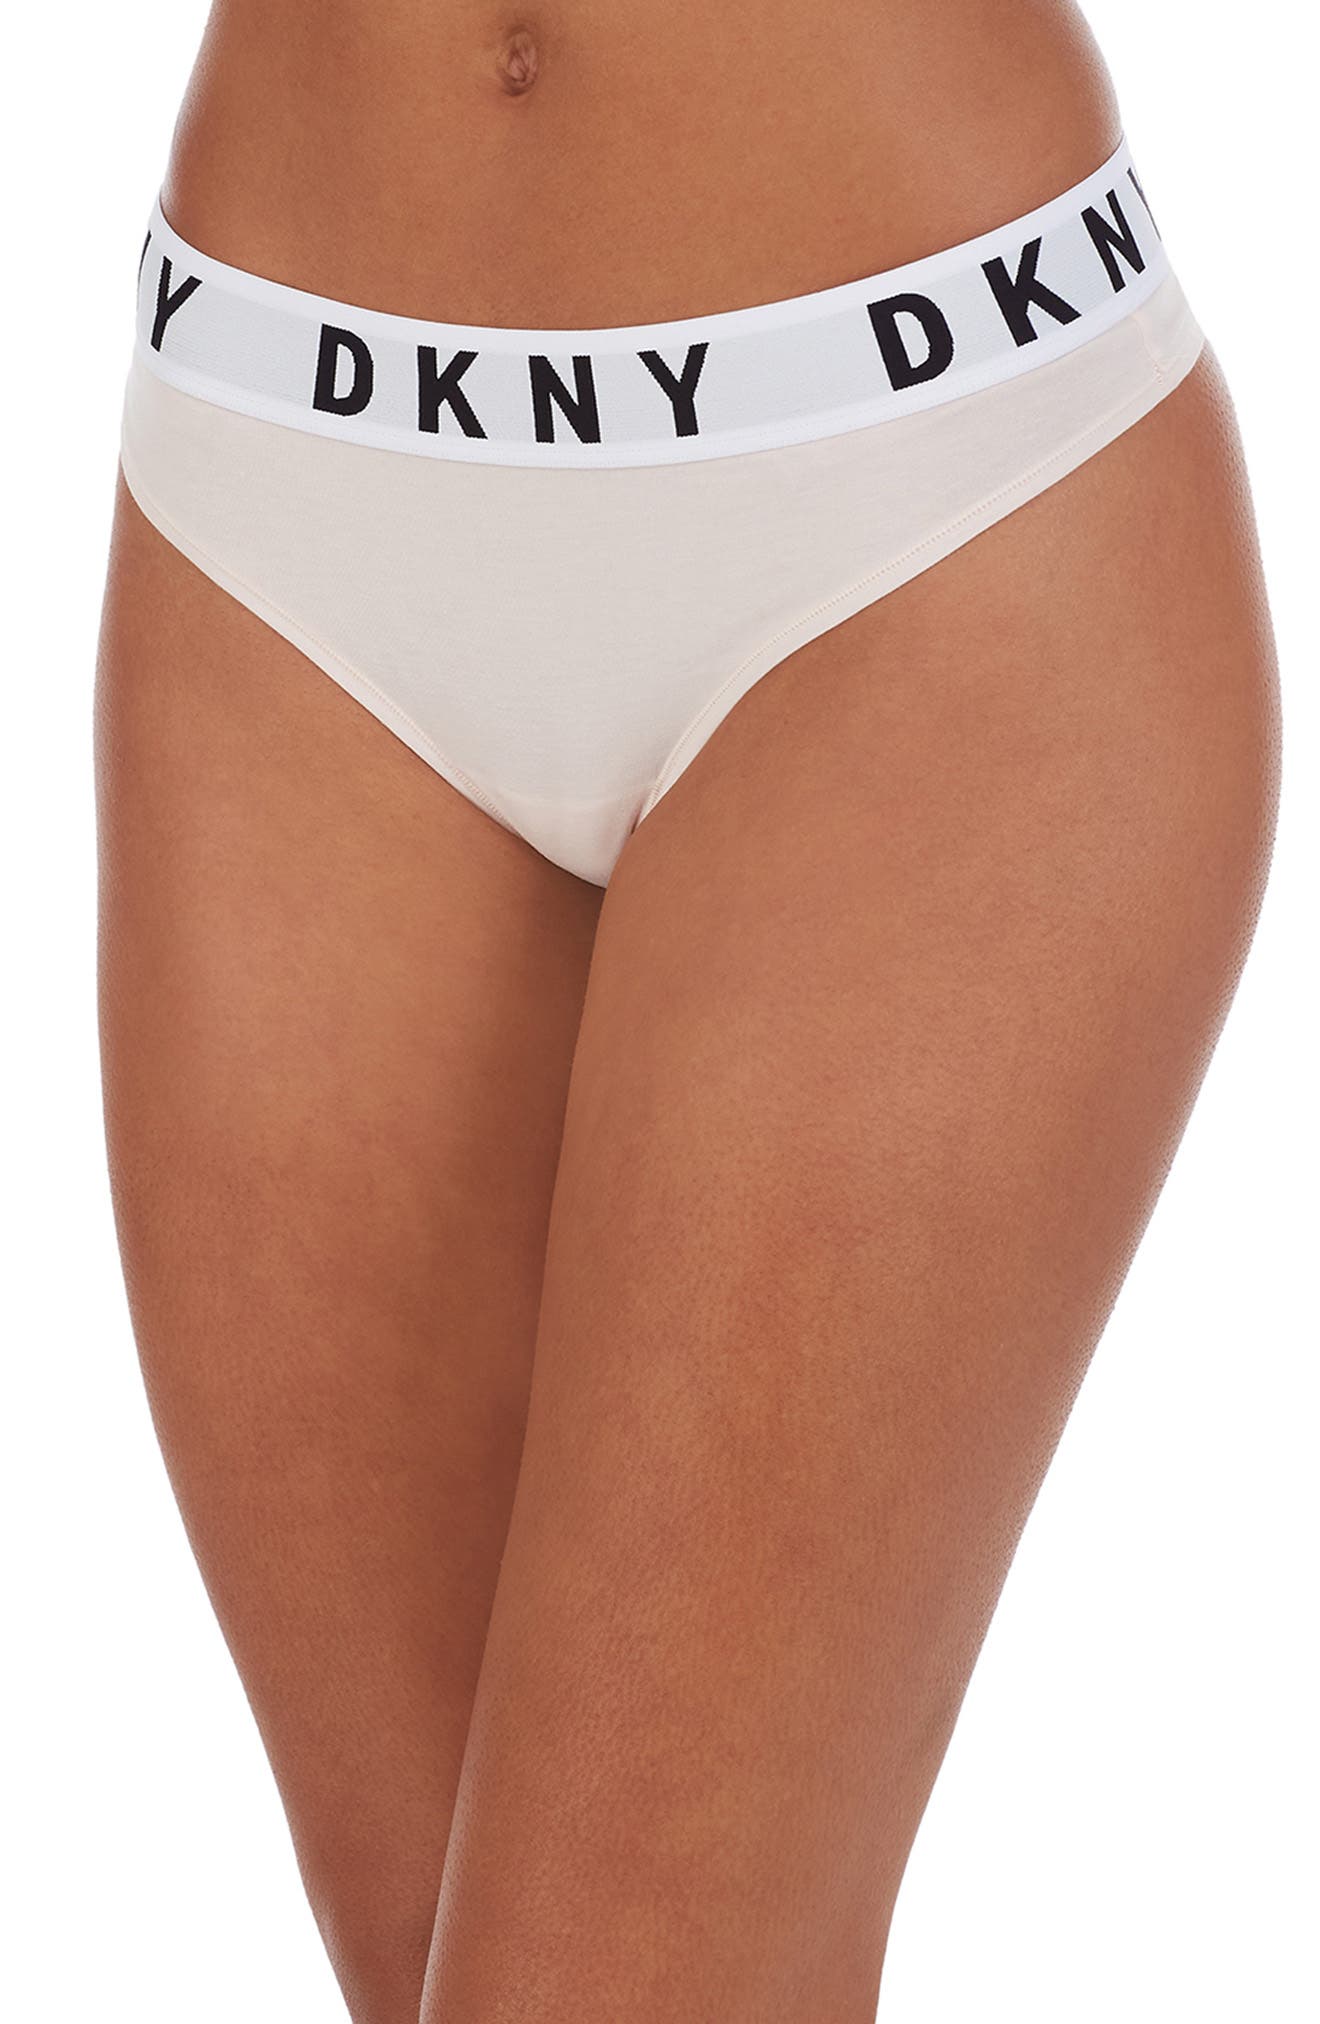 2-PACK DKNY Briefs / Thongs 1 3-PK Size Large / 7 60% off RRP